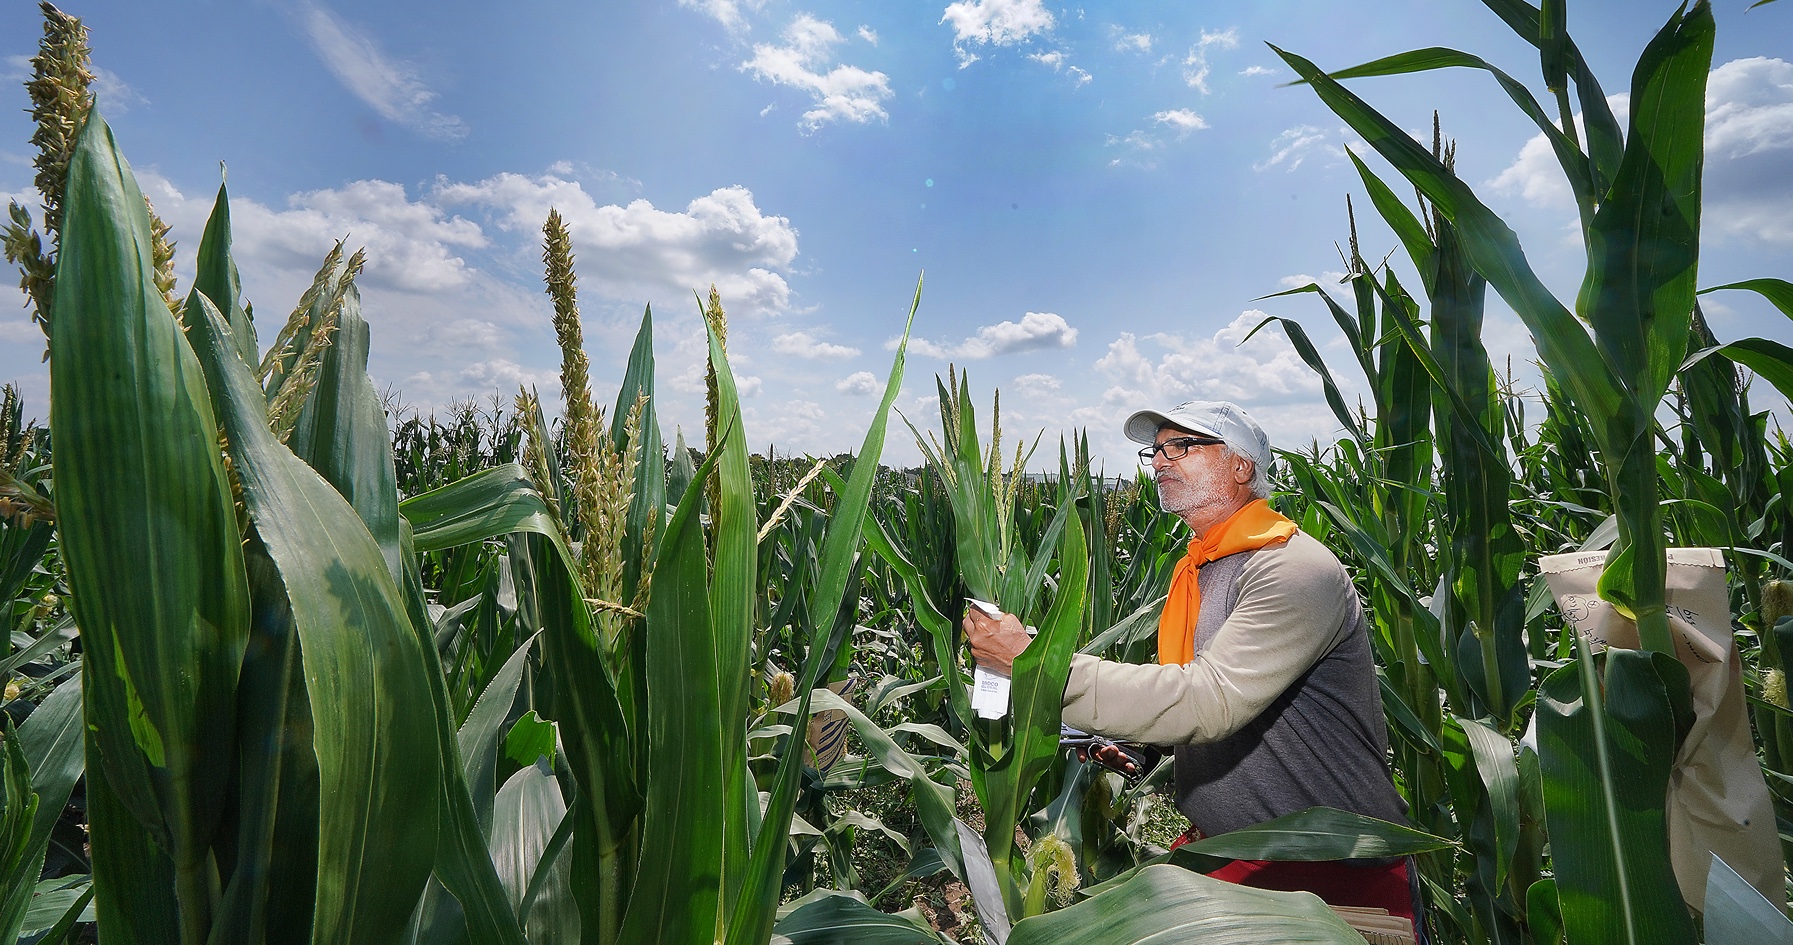 Purdue researcher’s short corn has far-reaching potential for growers, industry and the environment